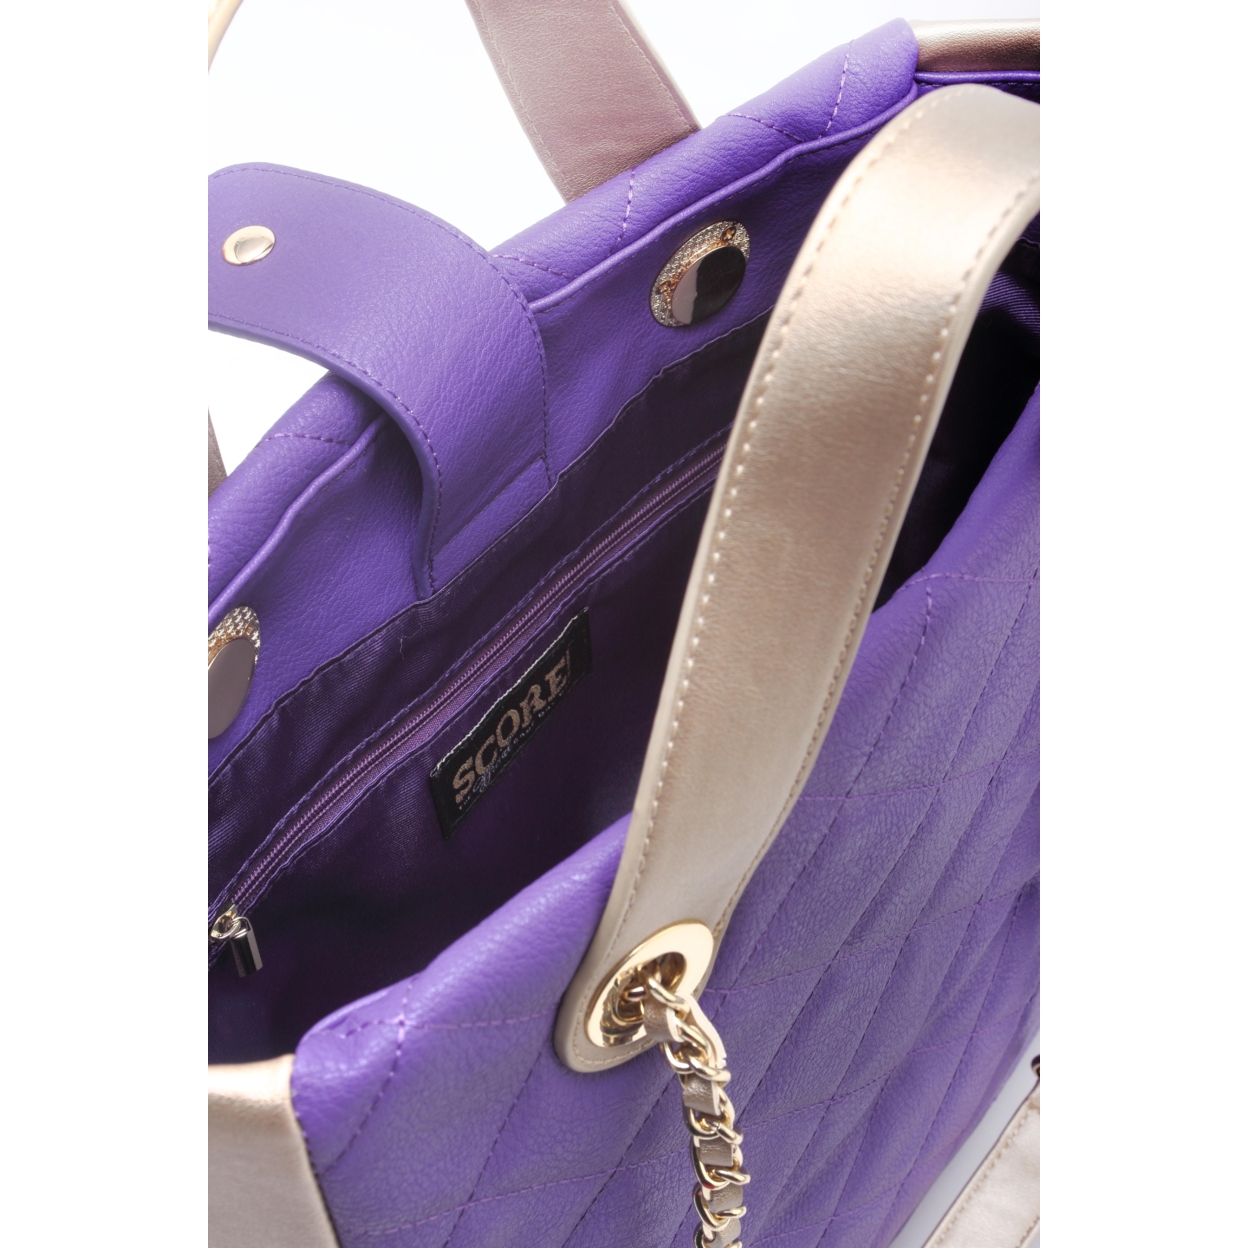 SCORE!'s Kat Travel Tote For Business, Work, Or School Quilted Shoulder Bag - Purple And Gold Gold